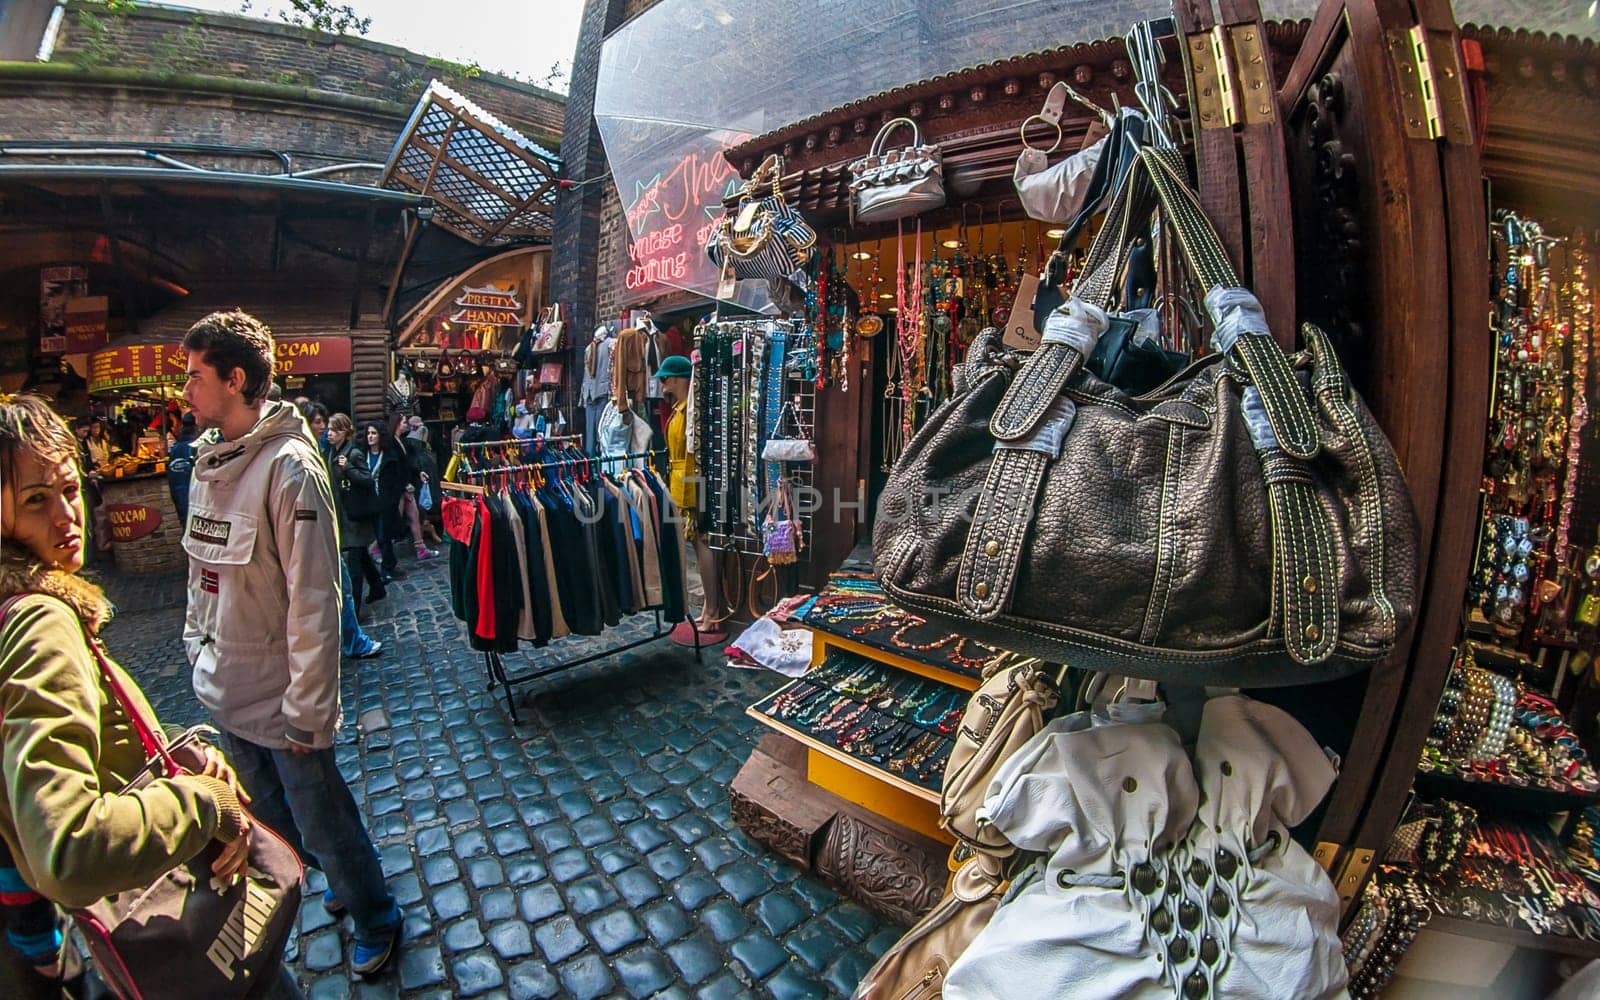 London, United Kingdom - March 31, 2007: Extreme wide angle (fisheye) photo of bags, clothes and other accessories on display at Camden Lock, famous flea market in UK capital. by Ivanko